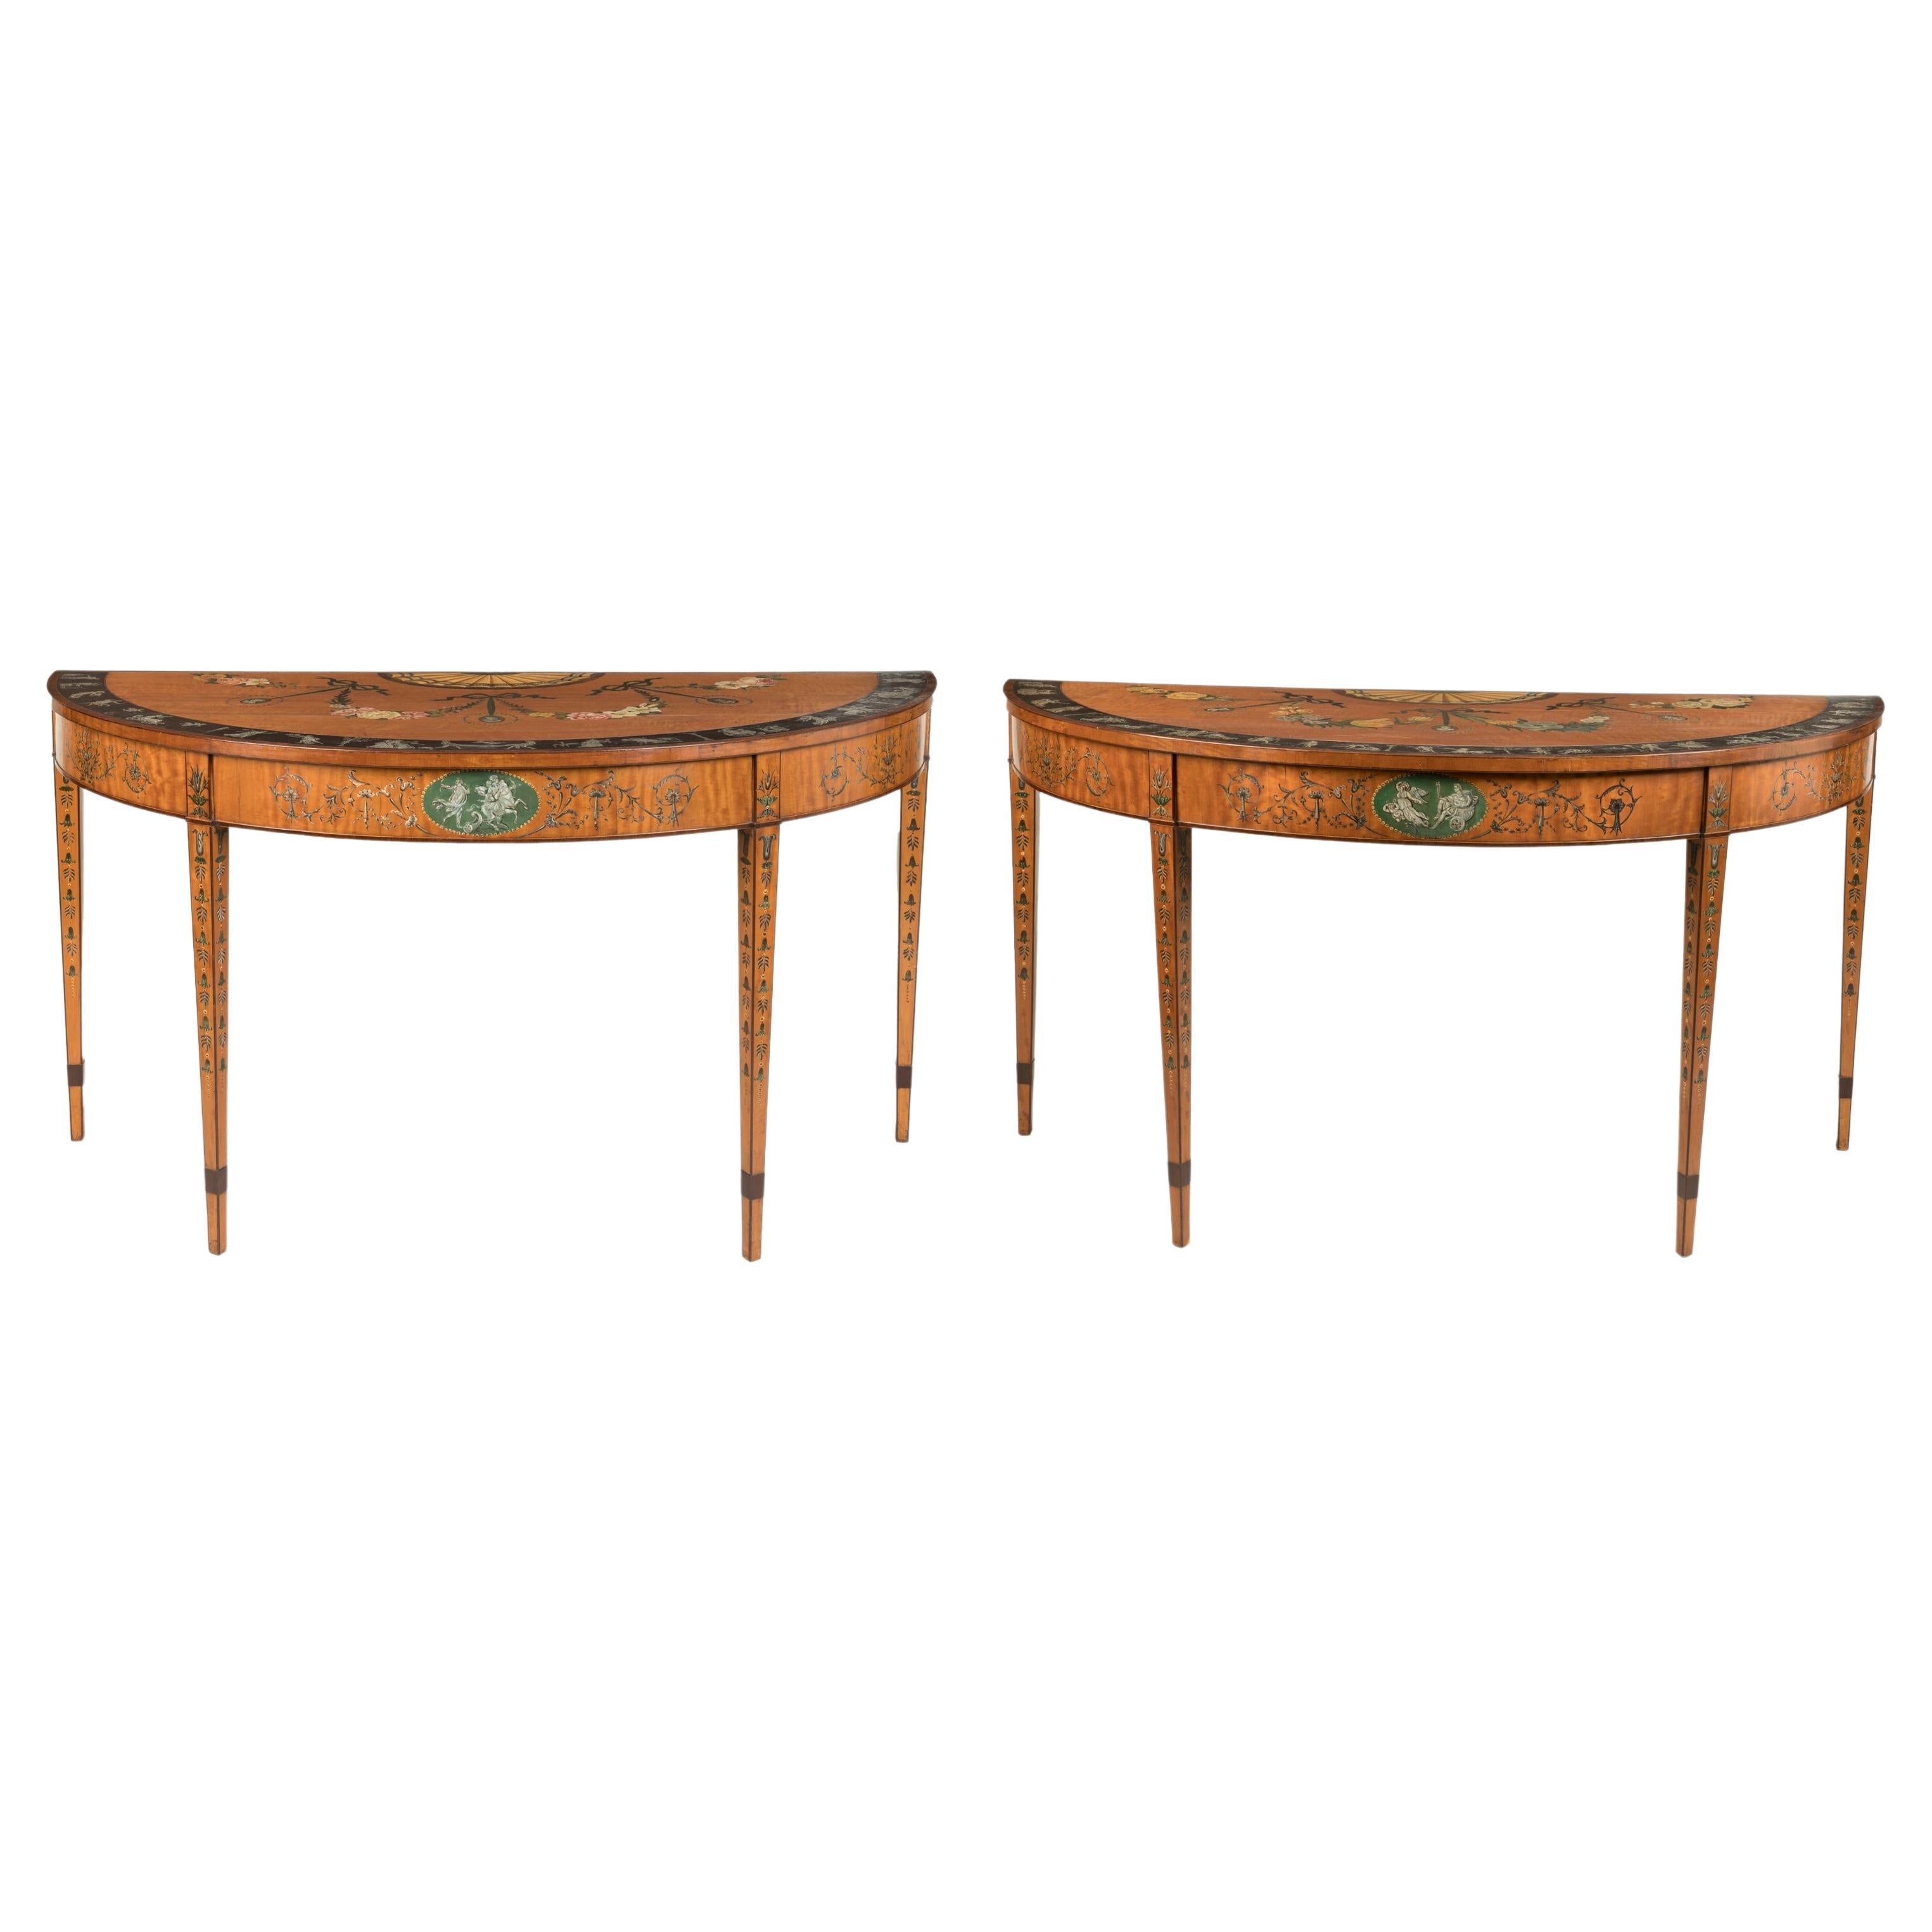 Pair of 19th Century Neoclassical Painted Satinwood Demilune Console Tables For Sale